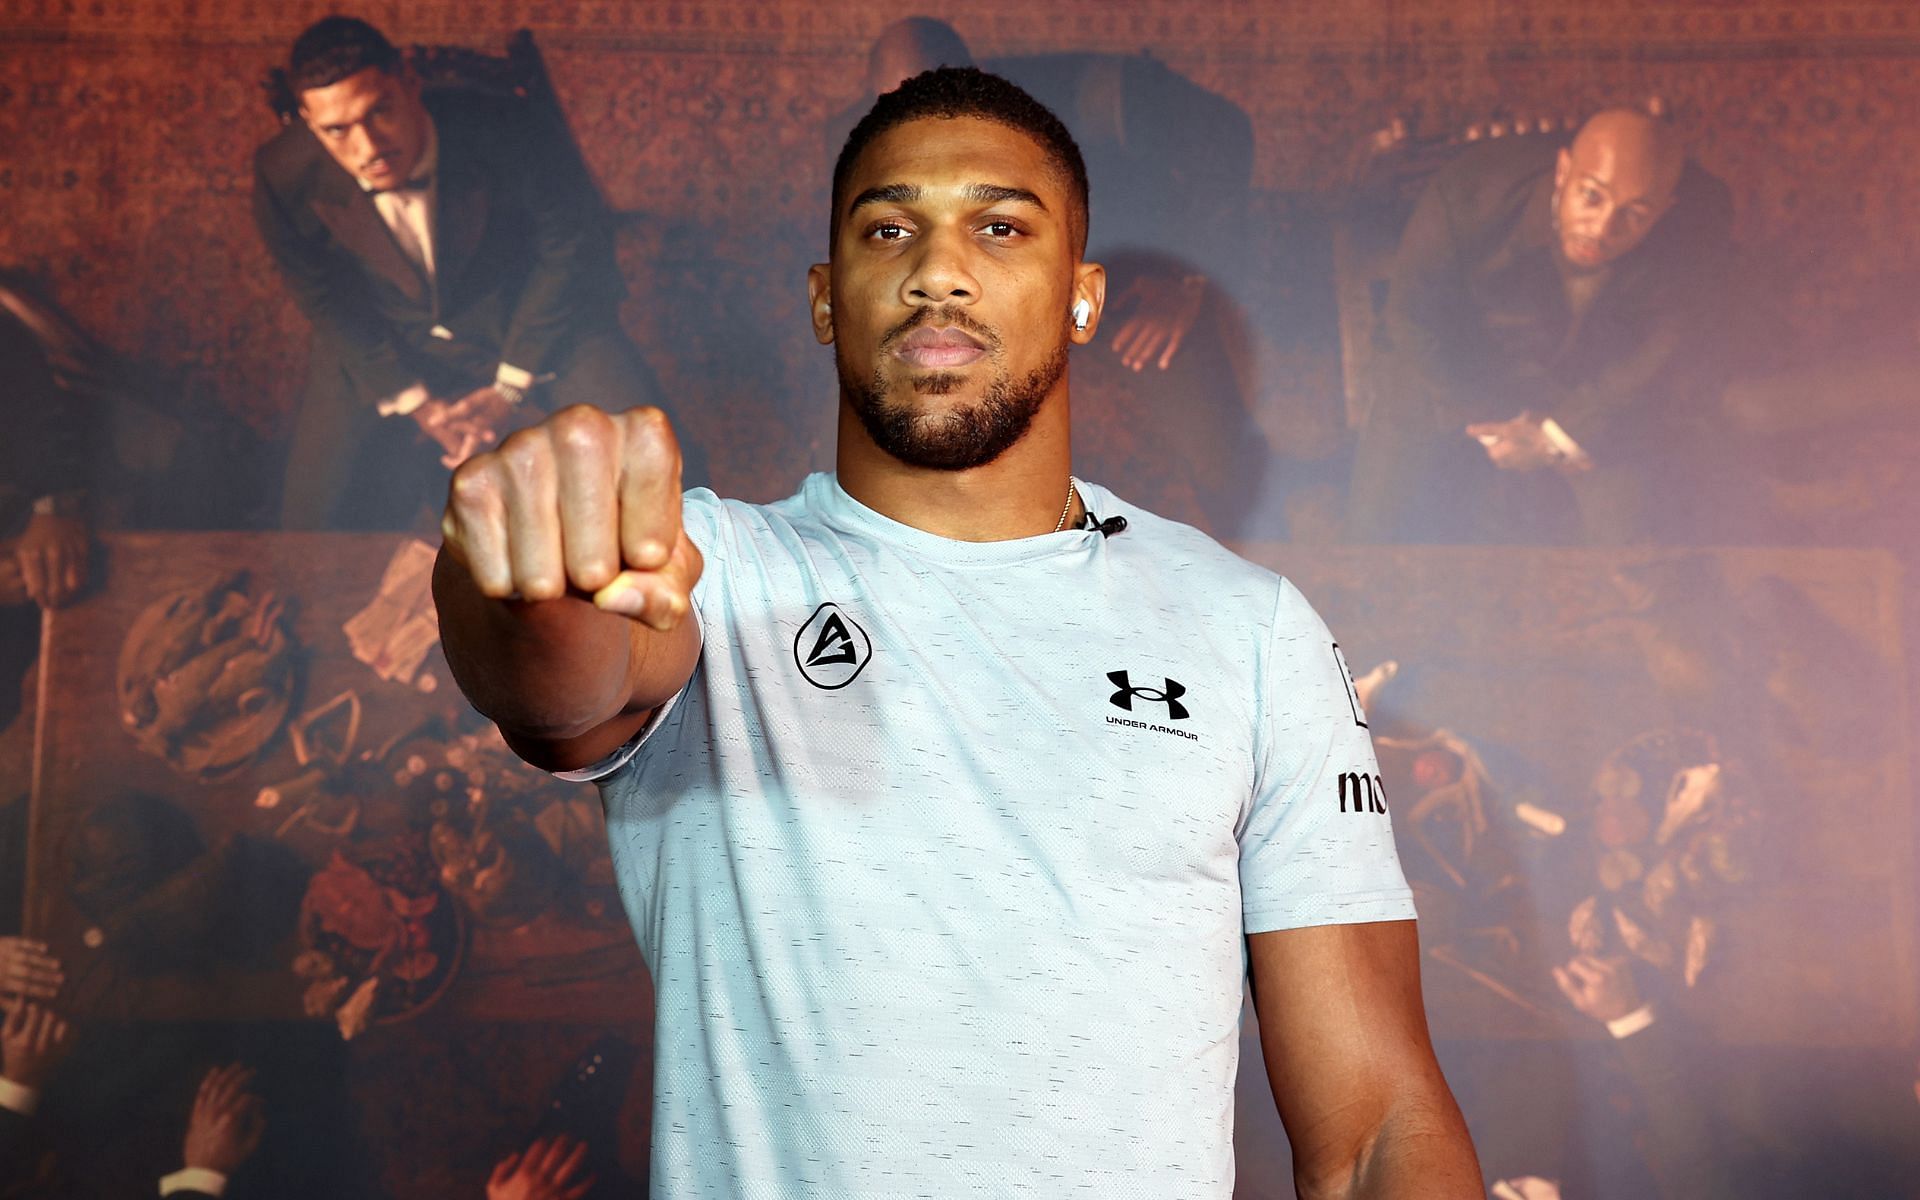 UK boxing icon Anthony Joshua has vowed to work his way back to boxing heavyweight gold [Image courtesy: Getty Images]